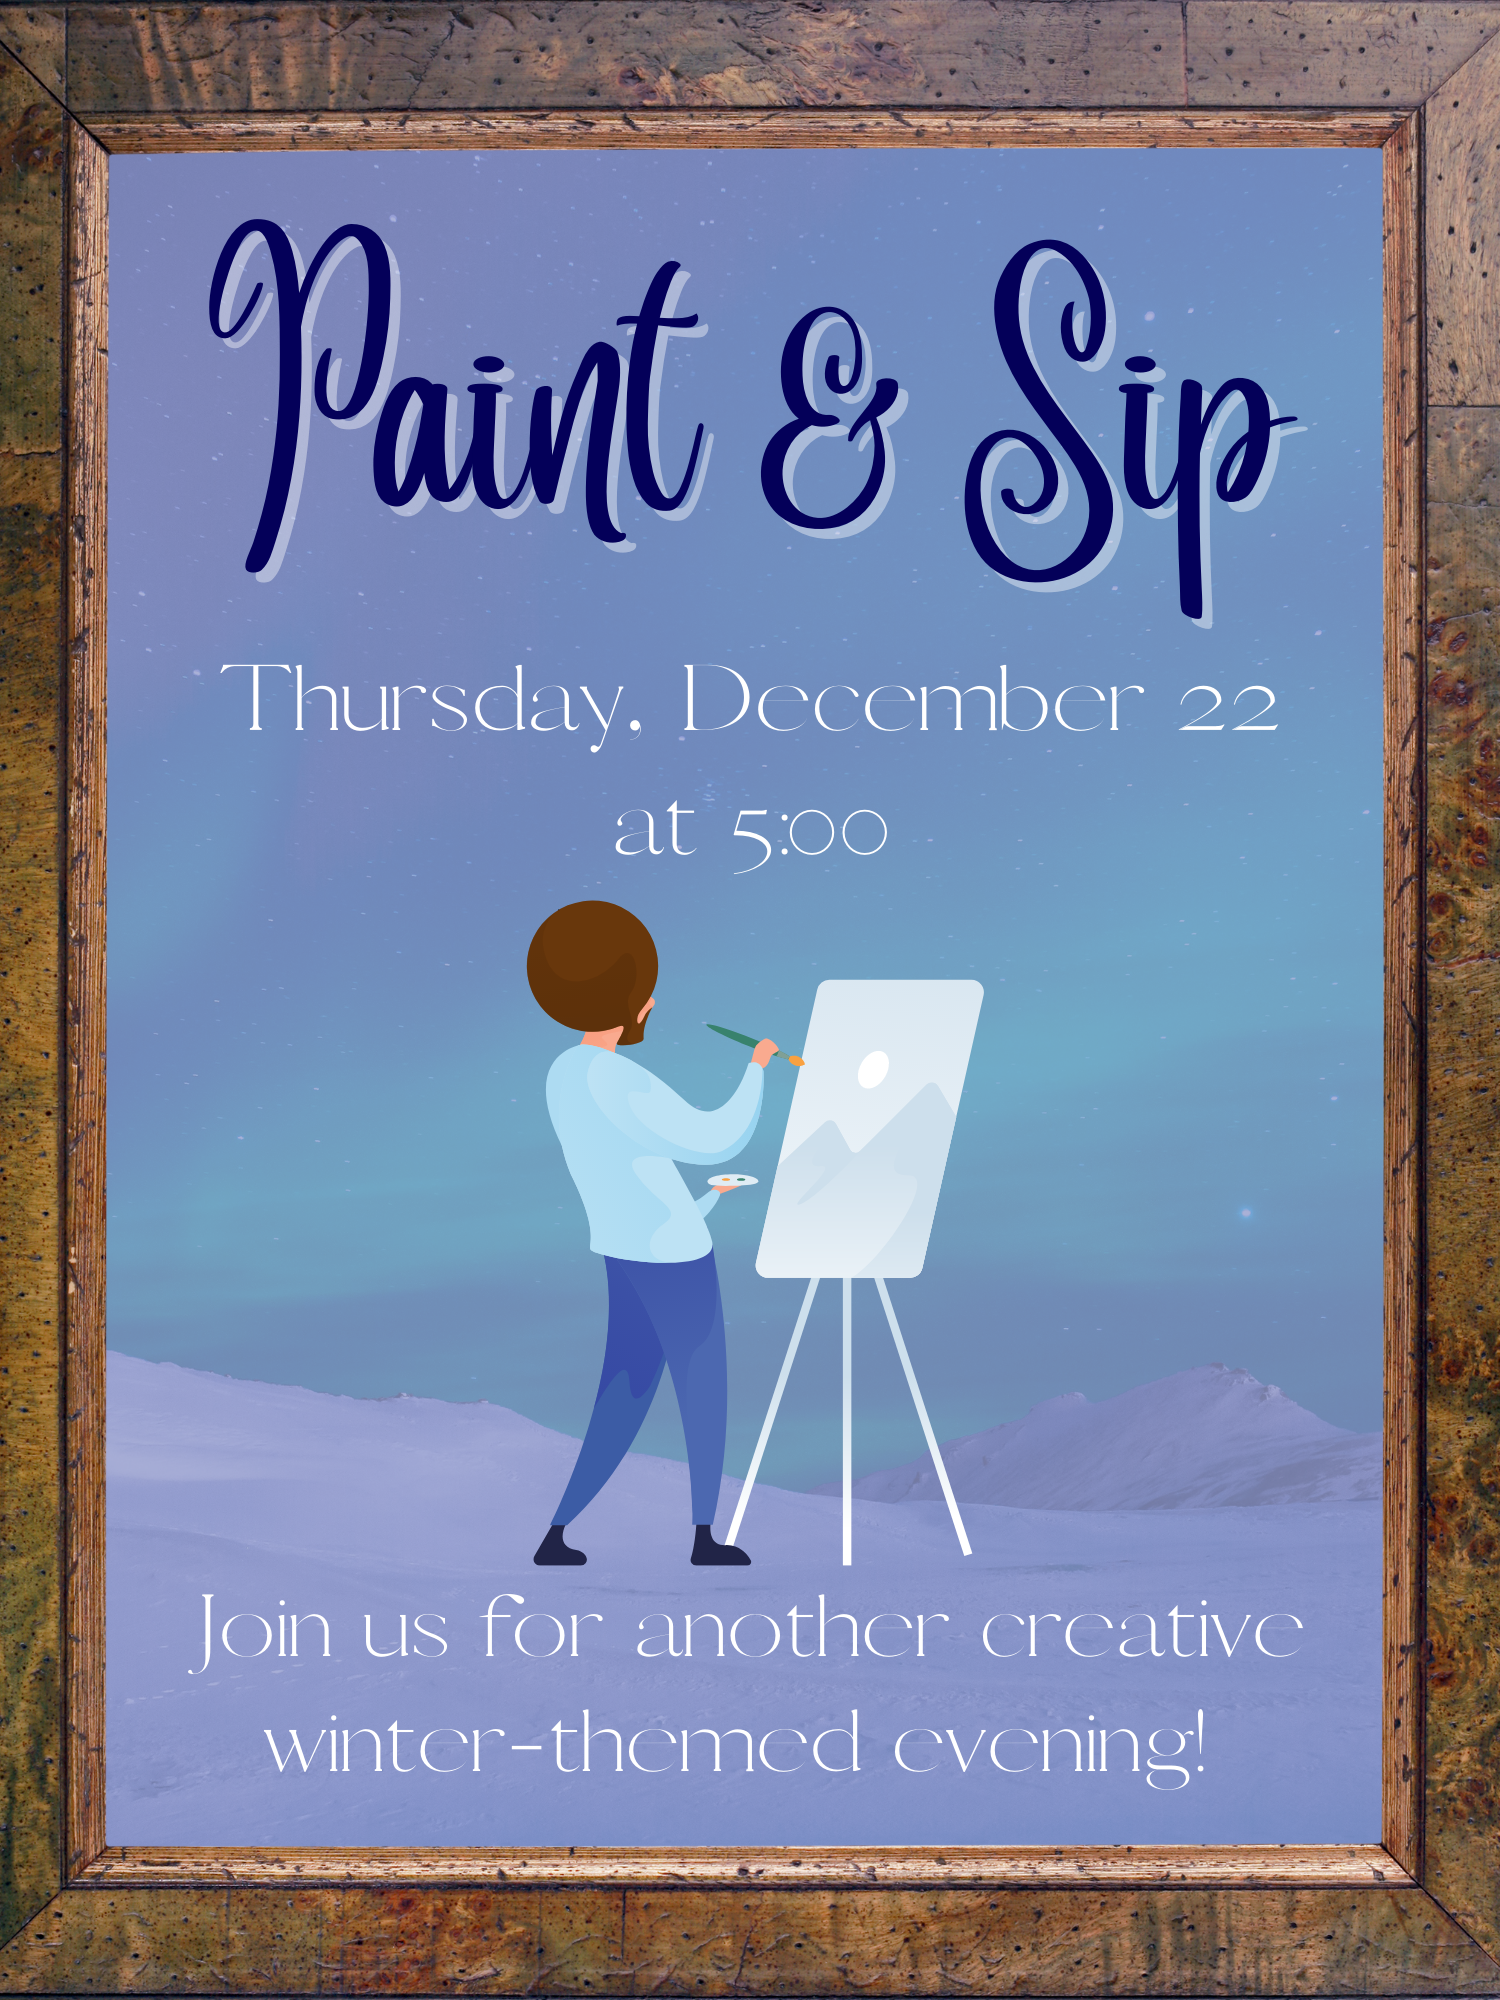 Framed graphic of a winter scene for Paint & Sip in December